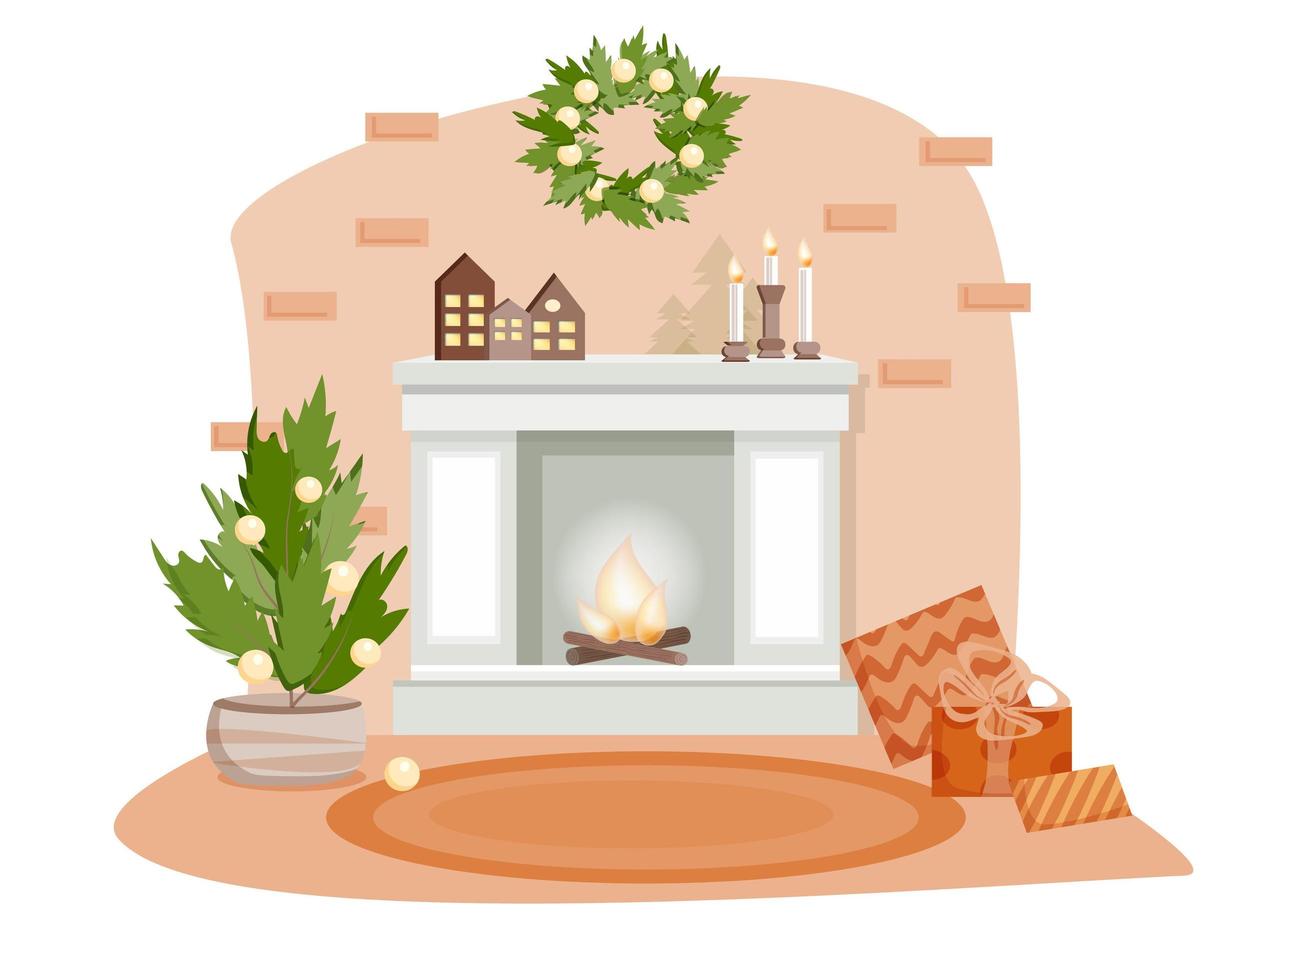 House interior in New Year's style. Fireplace with fire, Christmas tree with balls. Candles, gifts and decorations. Christmas wreath on the wall. The vector is made in a flat style.